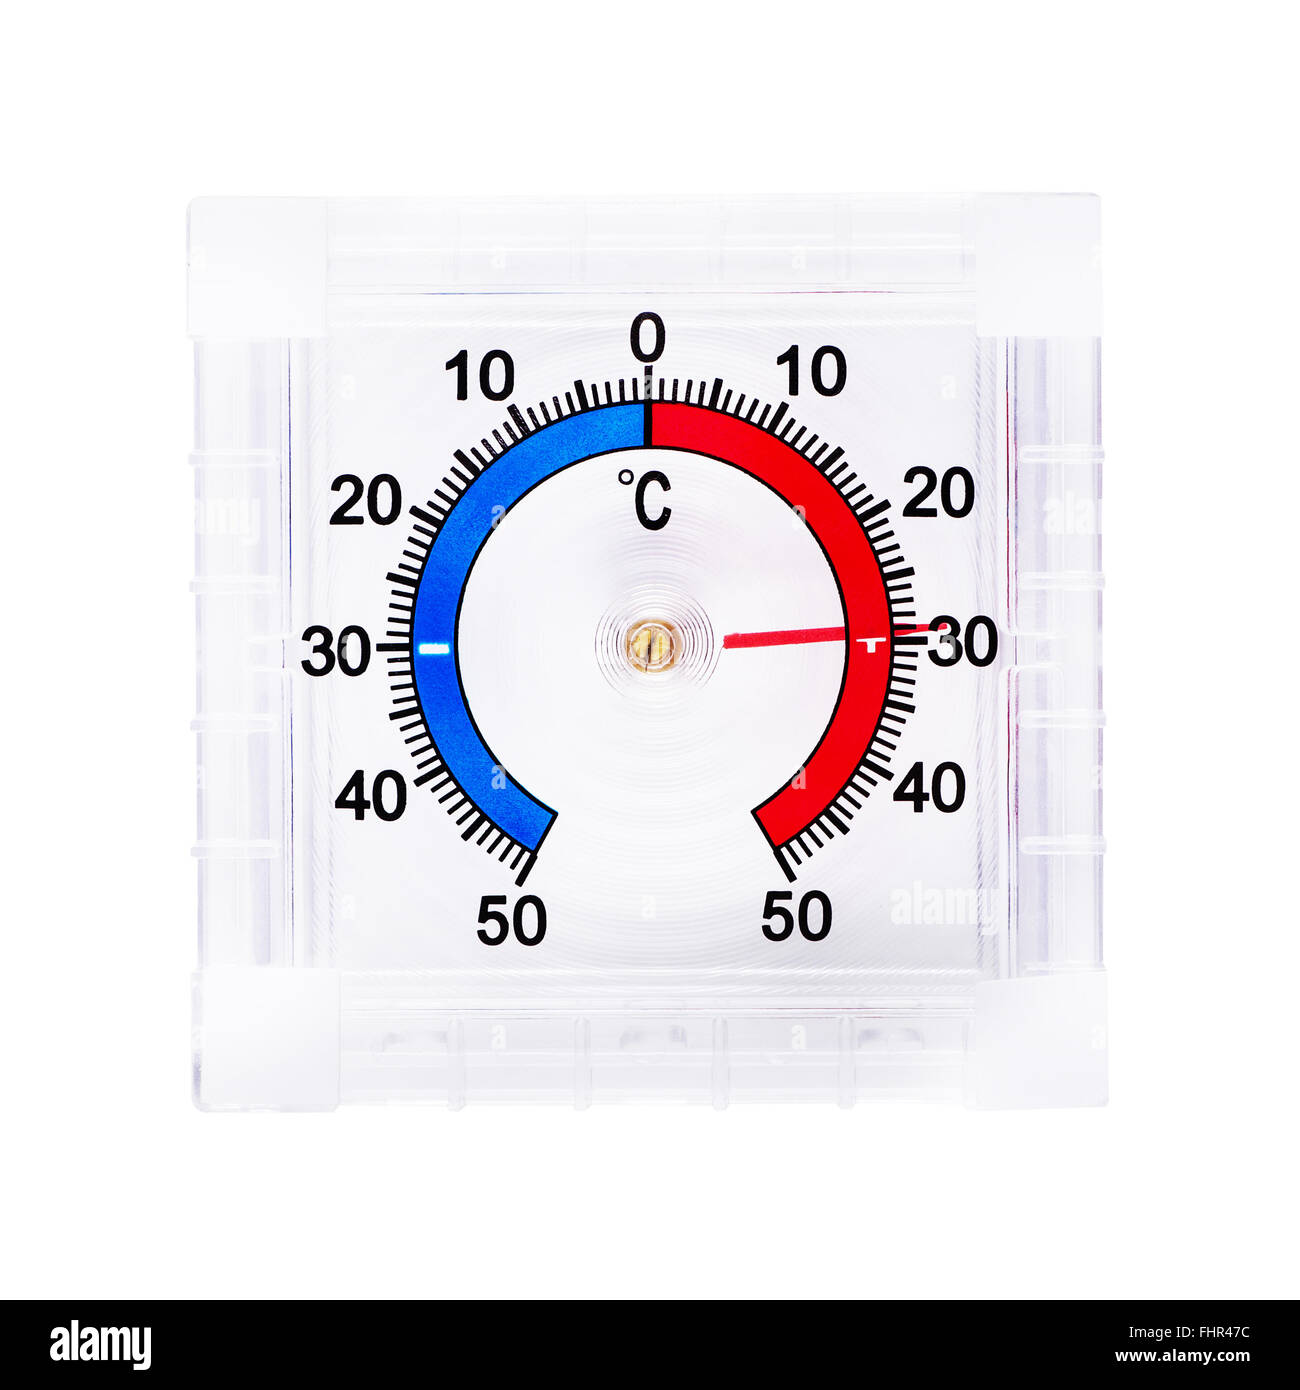 https://c8.alamy.com/comp/FHR47C/weather-thermometer-isolated-on-white-background-FHR47C.jpg